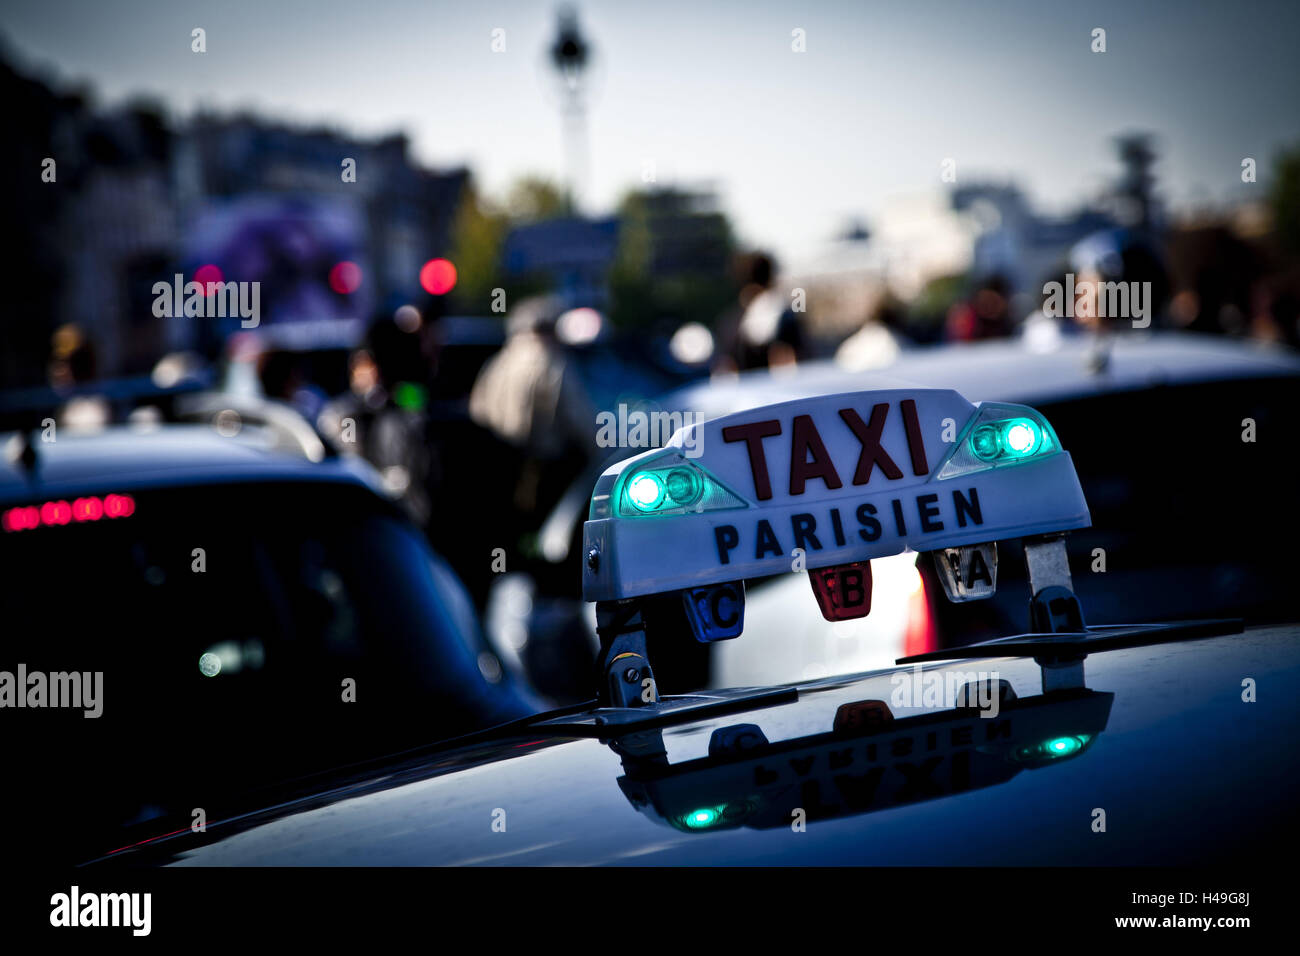 Taxi in Paris, France, Stock Photo